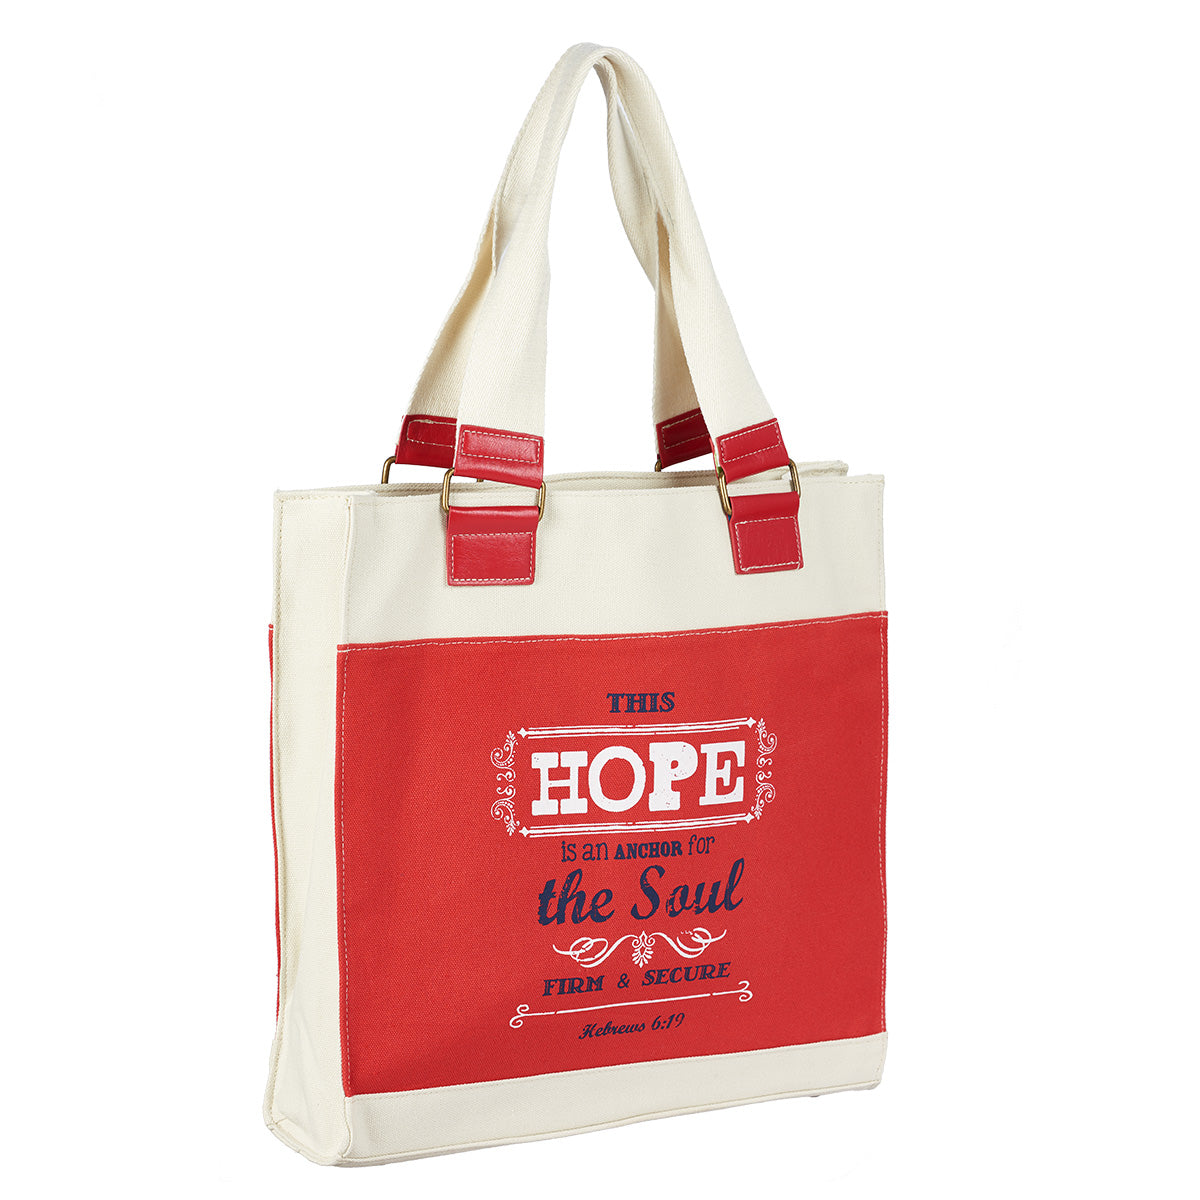 Image of Retro Blessings "Hope" Red Canvas Tote Bag - Hebrews 6:19 other